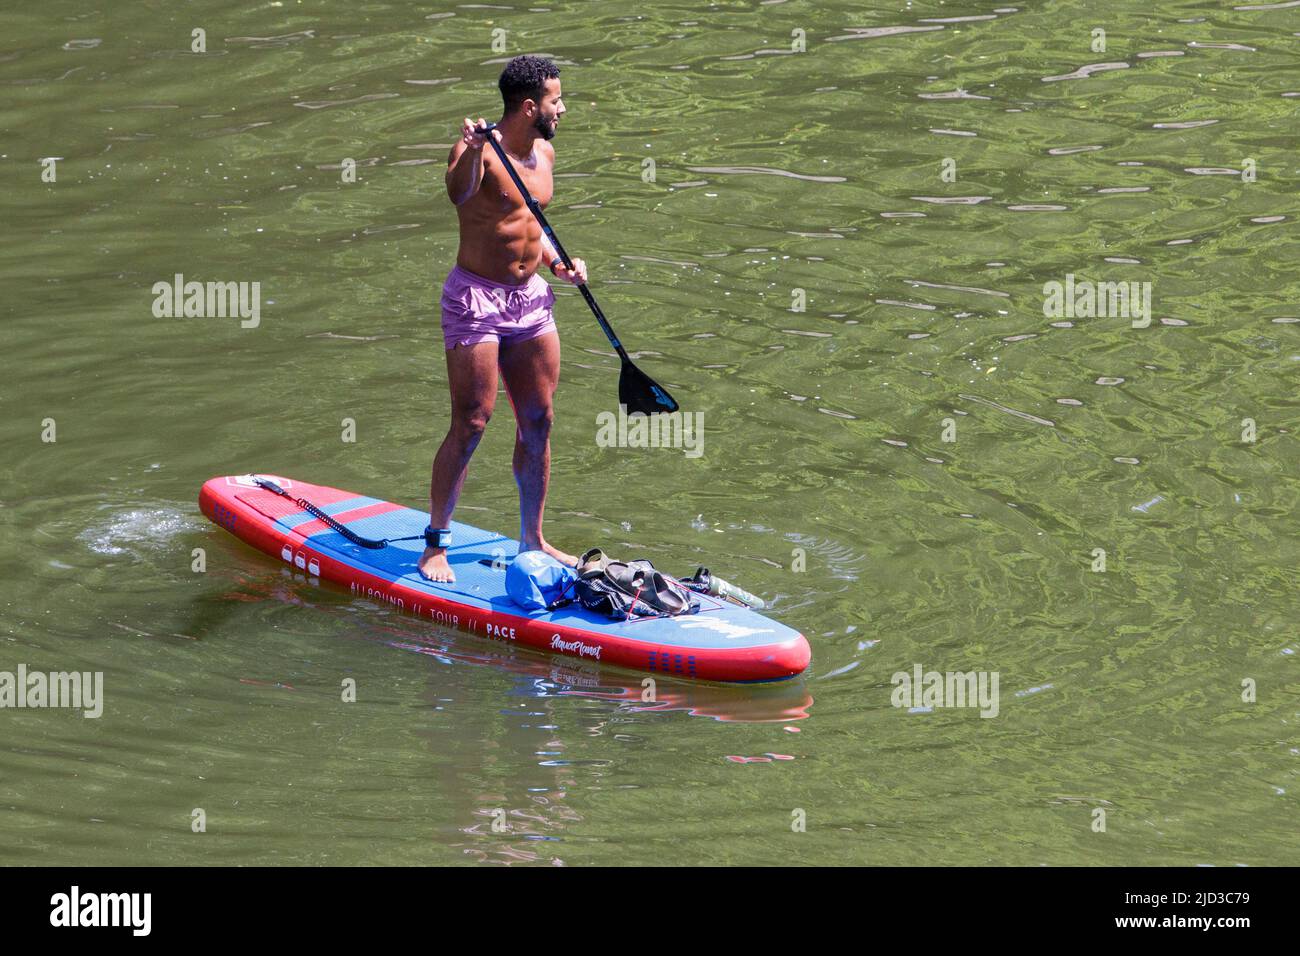 Bath, UK, 17th June, 2022. With many parts of the UK enjoying another very hot and sunny day, a paddleboarder is pictured enjoying the hot weather on the River Avon in front of Pulteney Bridge.  Credit: Lynchpics/Alamy Live News Stock Photo